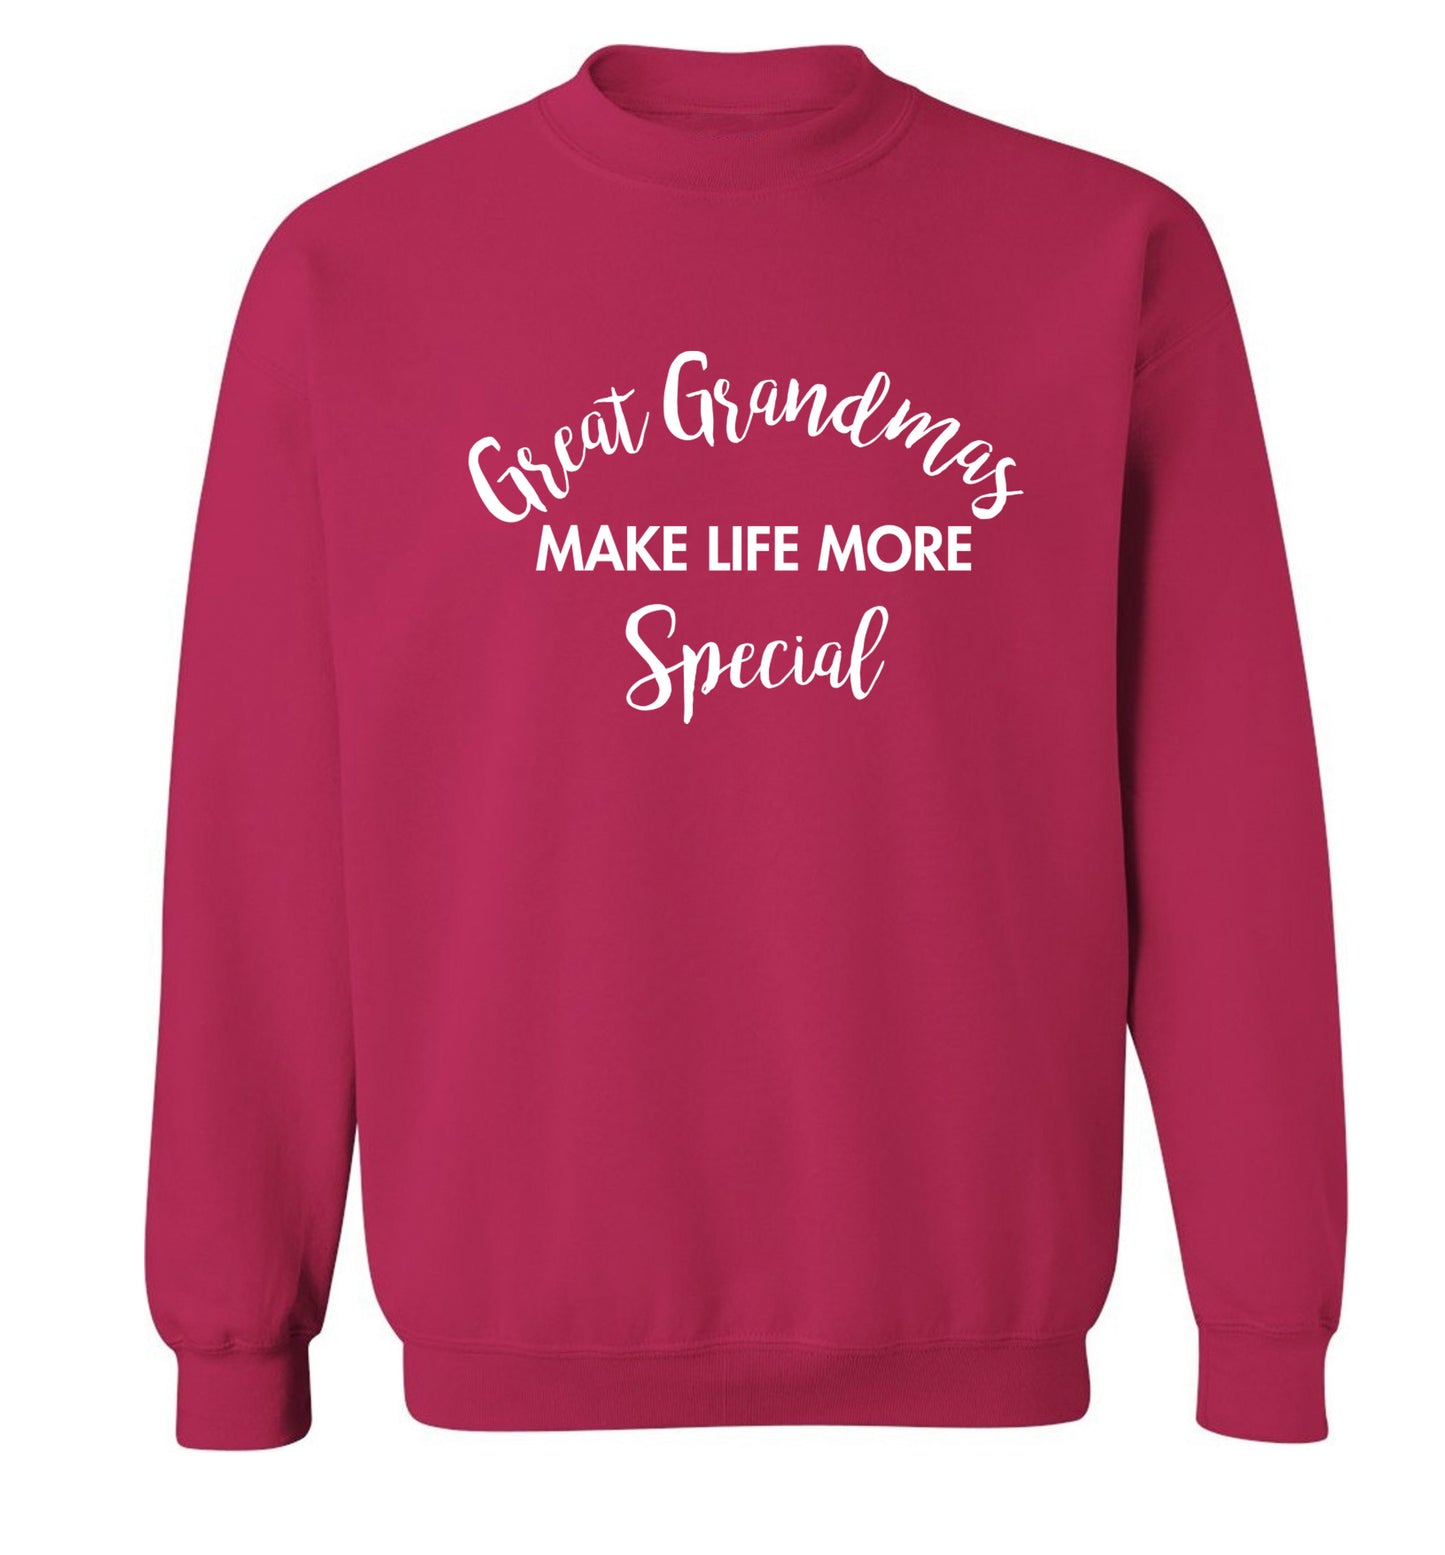 Great Grandmas make life more special Adult's unisex pink Sweater 2XL